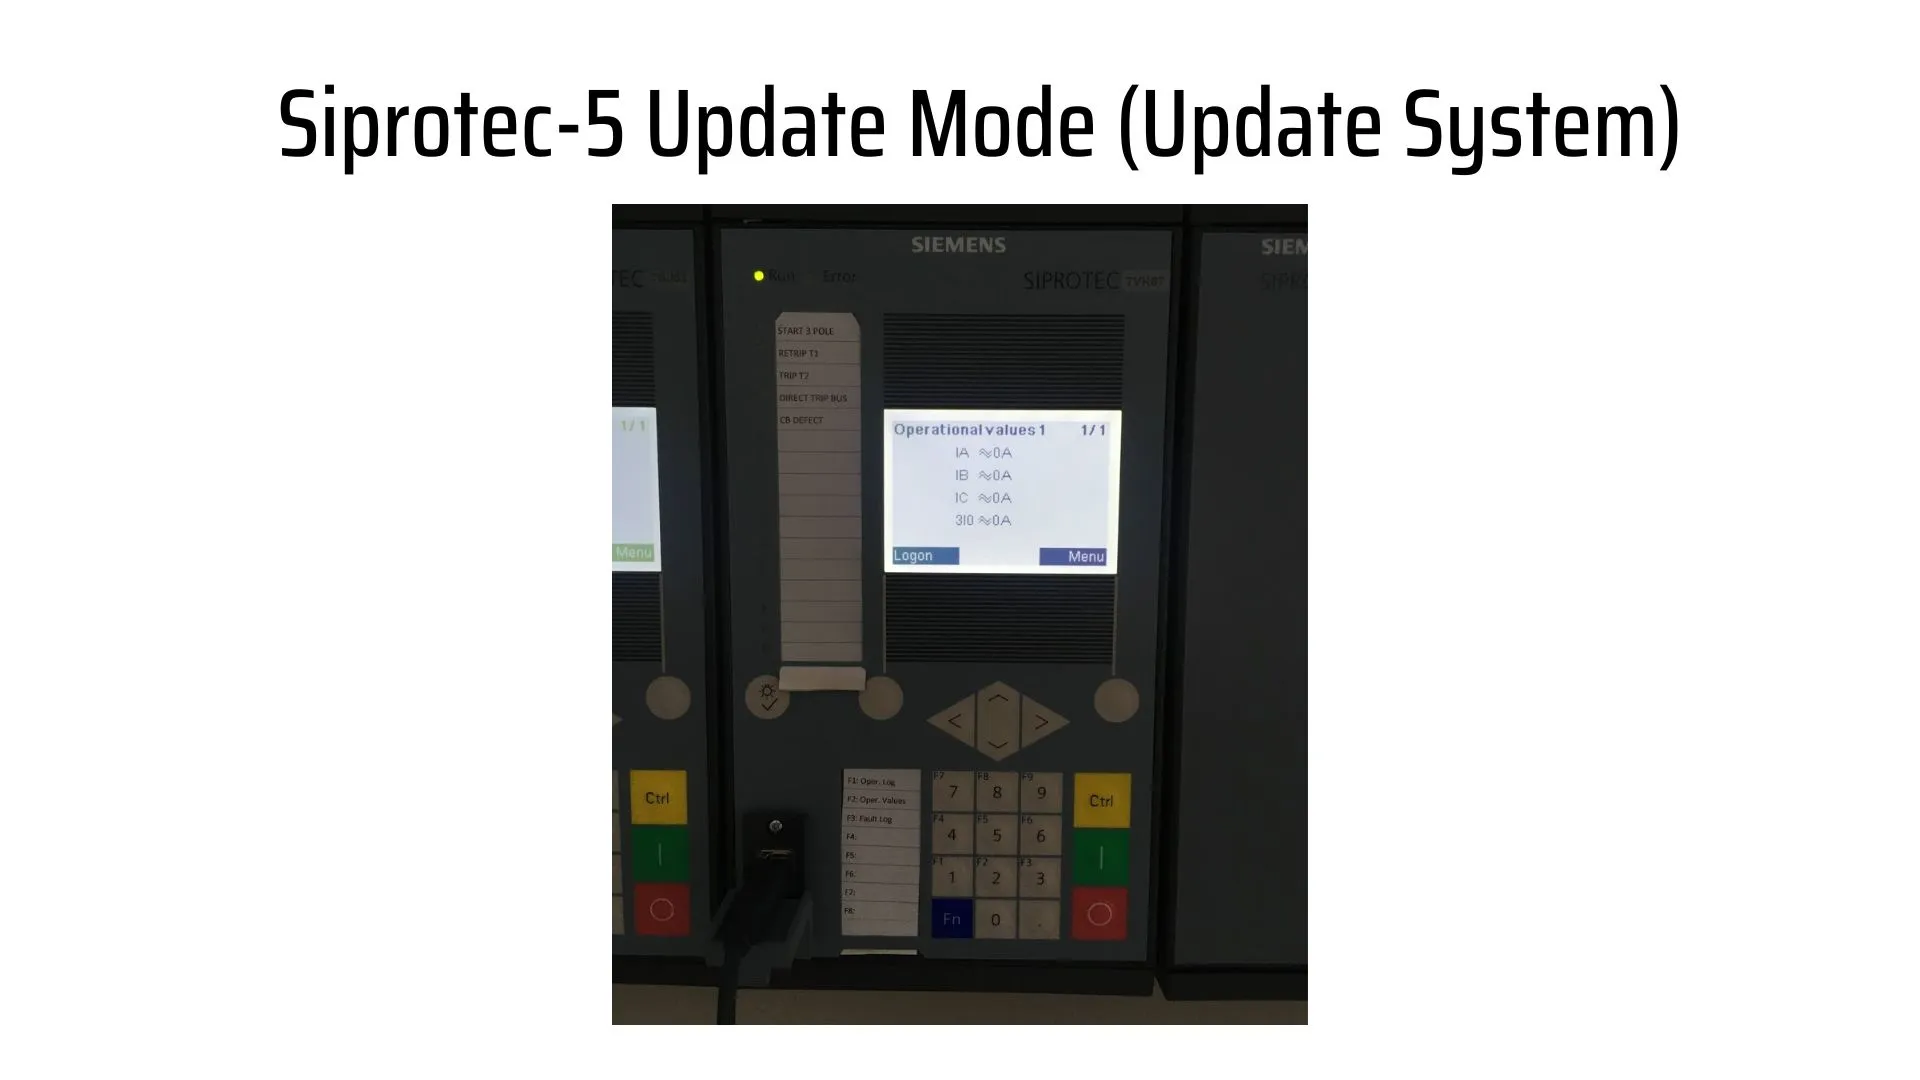 Siprotec-5 Update Mode (Update System)